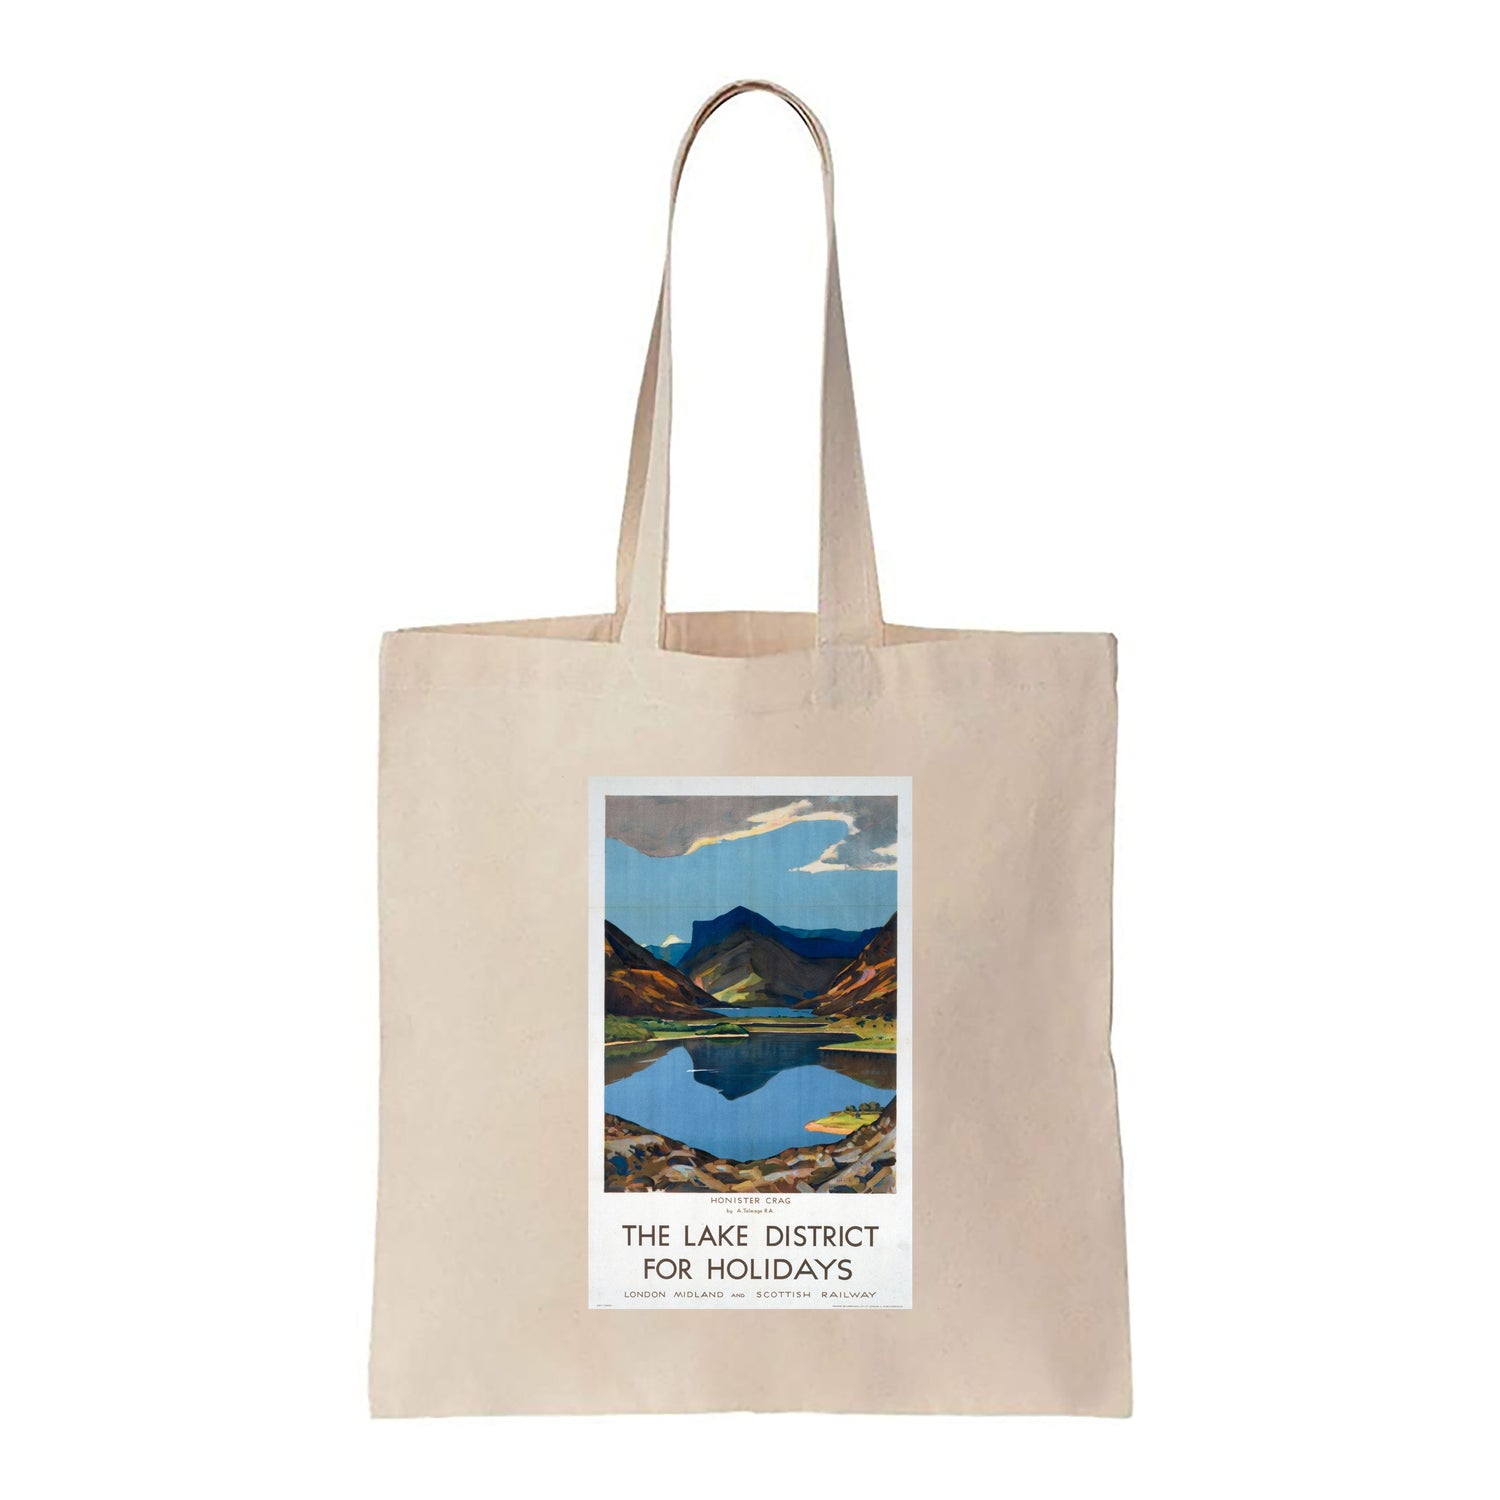 The Lake district for Holidays - Honister Crag - Canvas Tote Bag